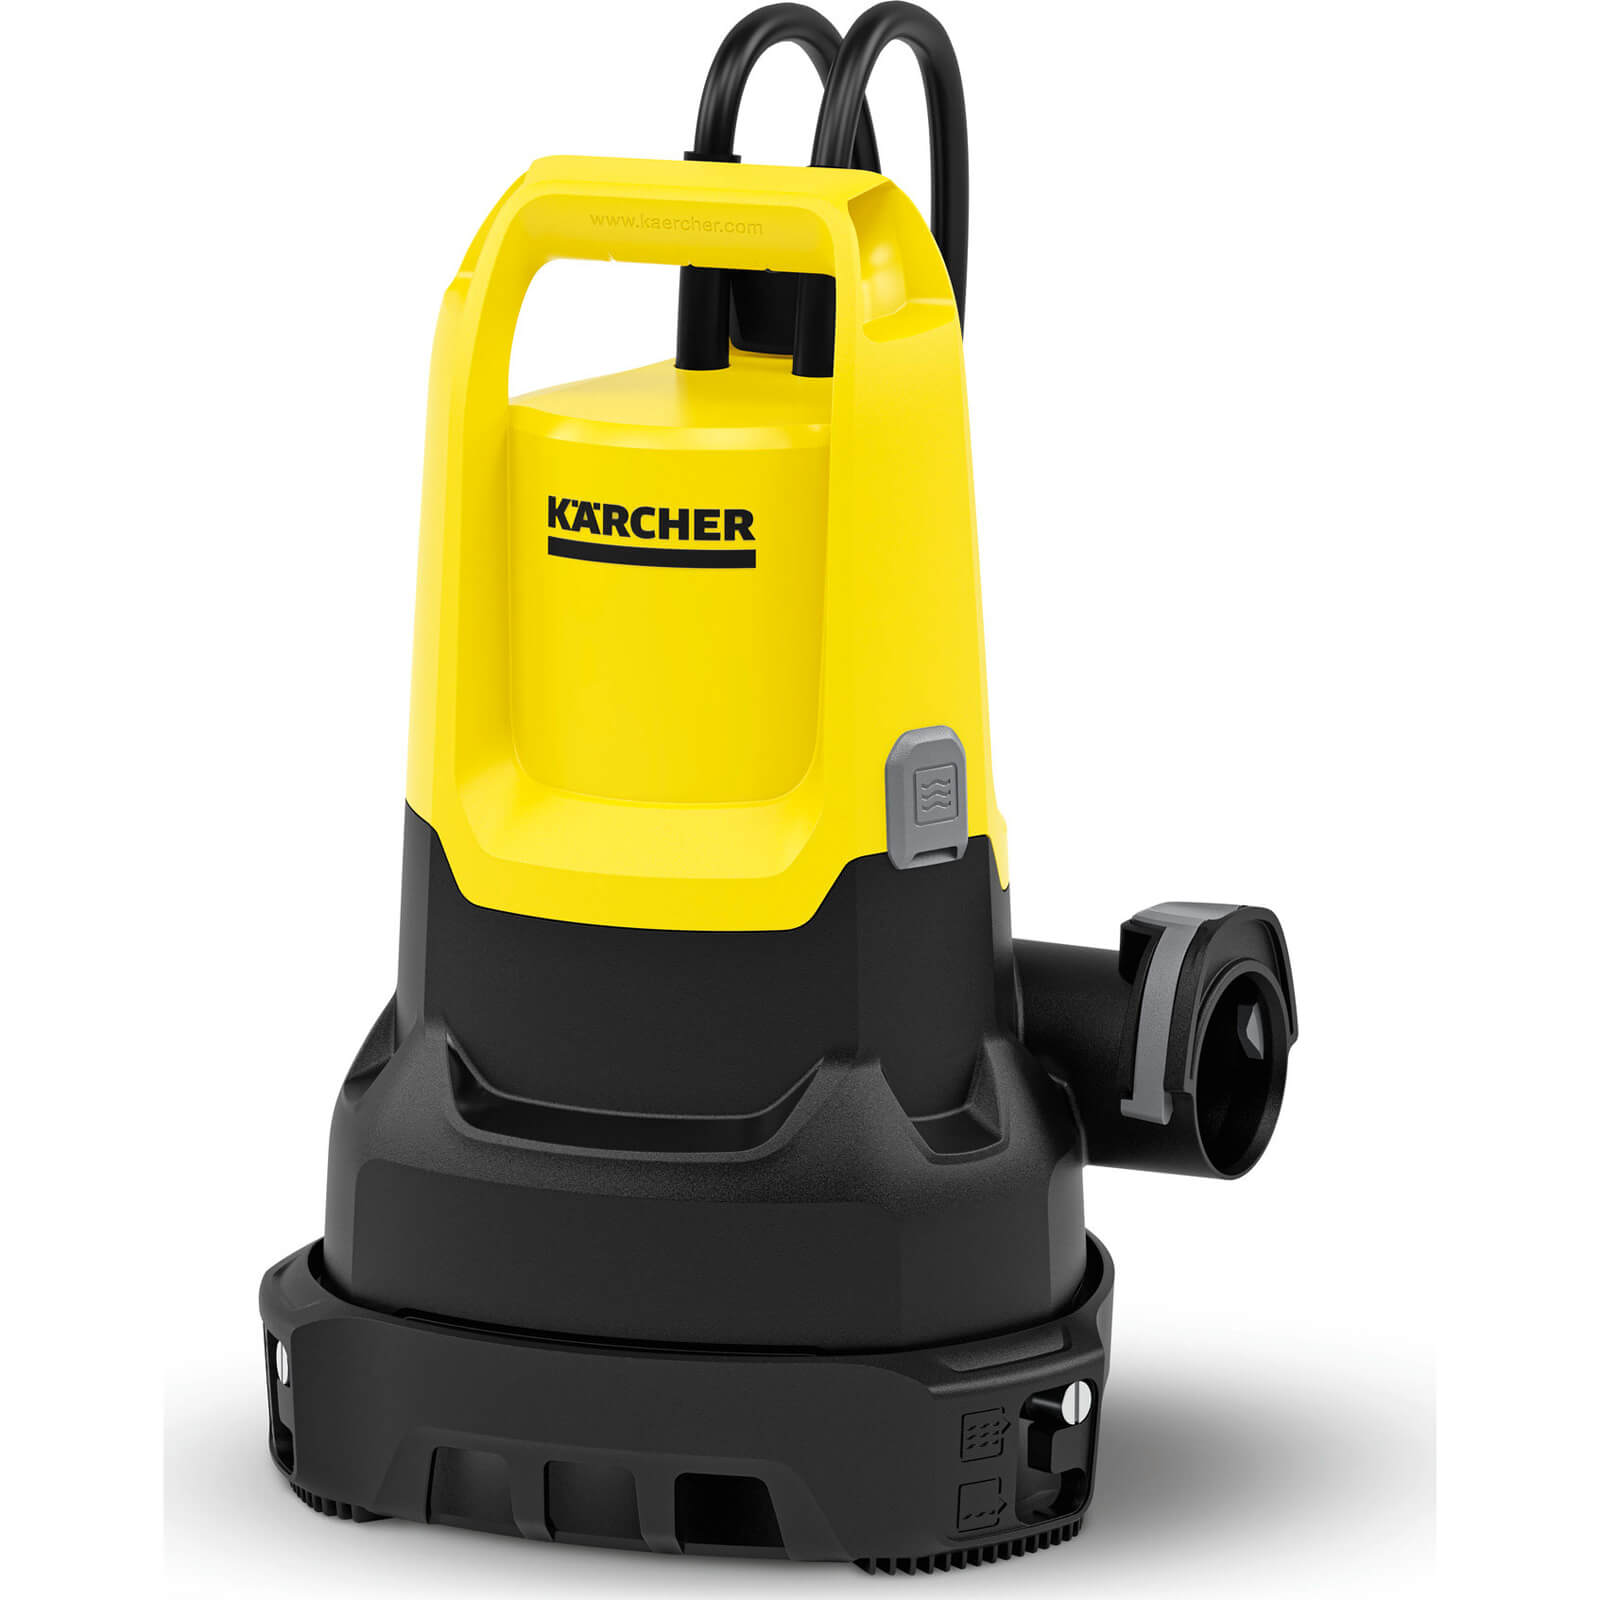 Karcher SP 16.000 2 in 1 Submersible Dirty Water Pump